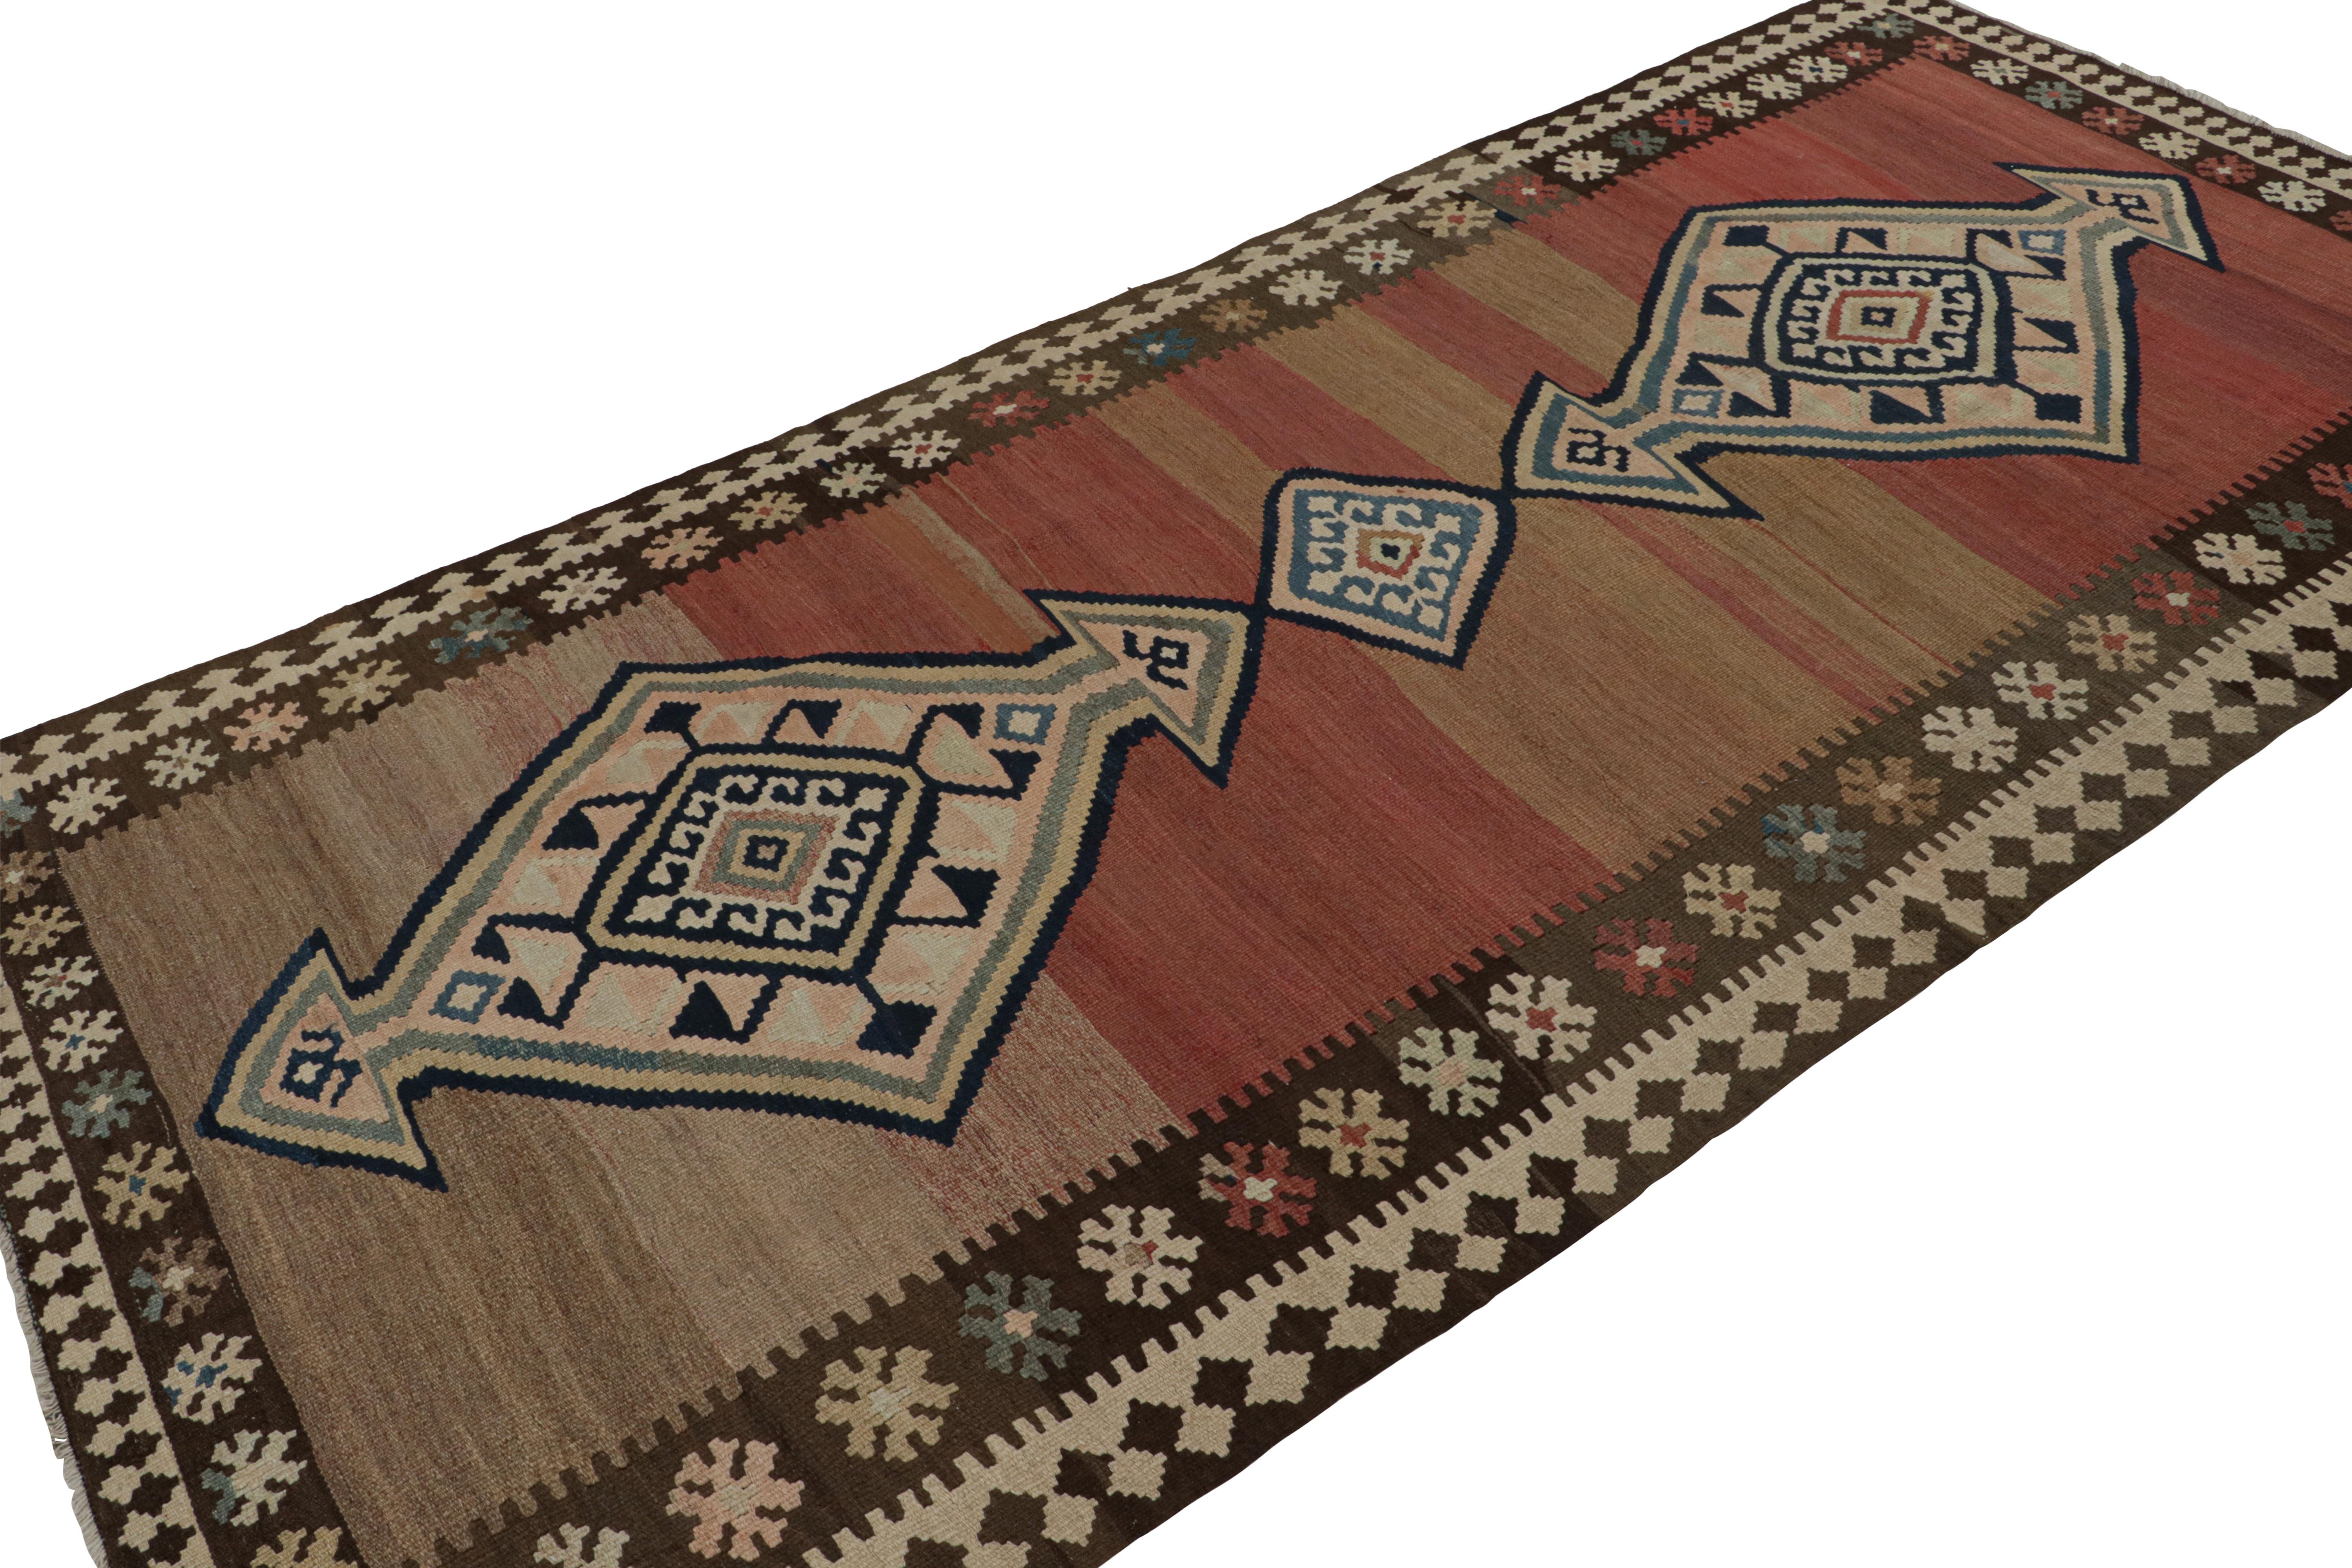 This vintage 5x10 Persian Kilim is a mid-century tribal rug - latest to join our Kilim & Flatweave collection. 

On the Design:

Handwoven in wool circa 1950-1960, the piece carries bold large-scale medallions on an open field with fabulous abrash